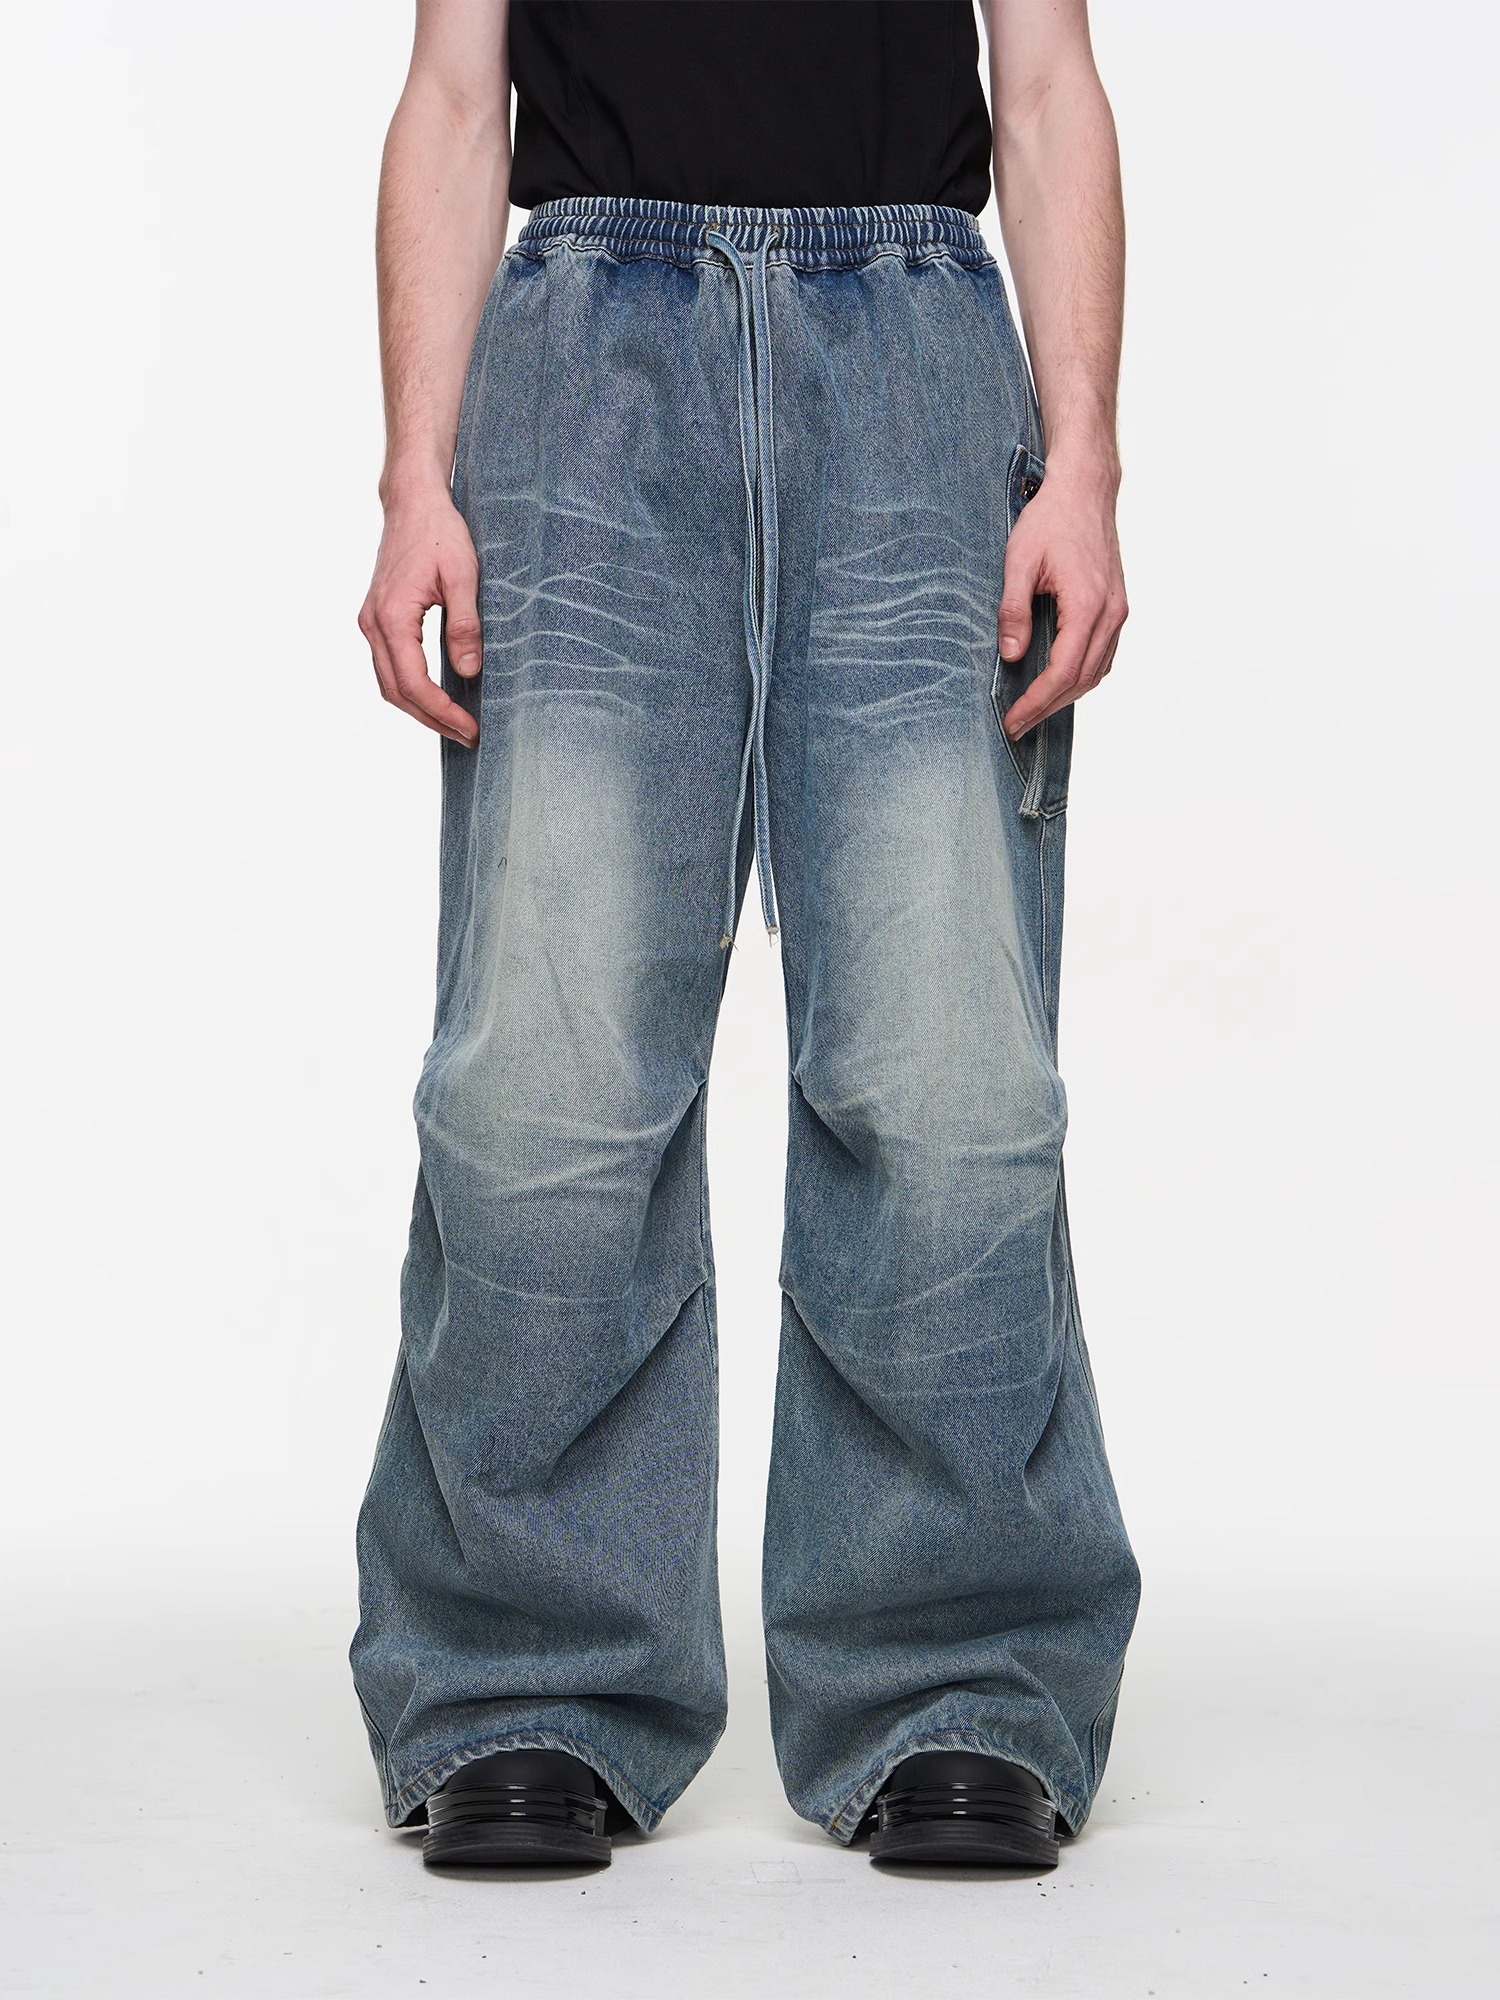 BLINDNOPLAN 24SS Distressed Wash 3D Pleated Jeans